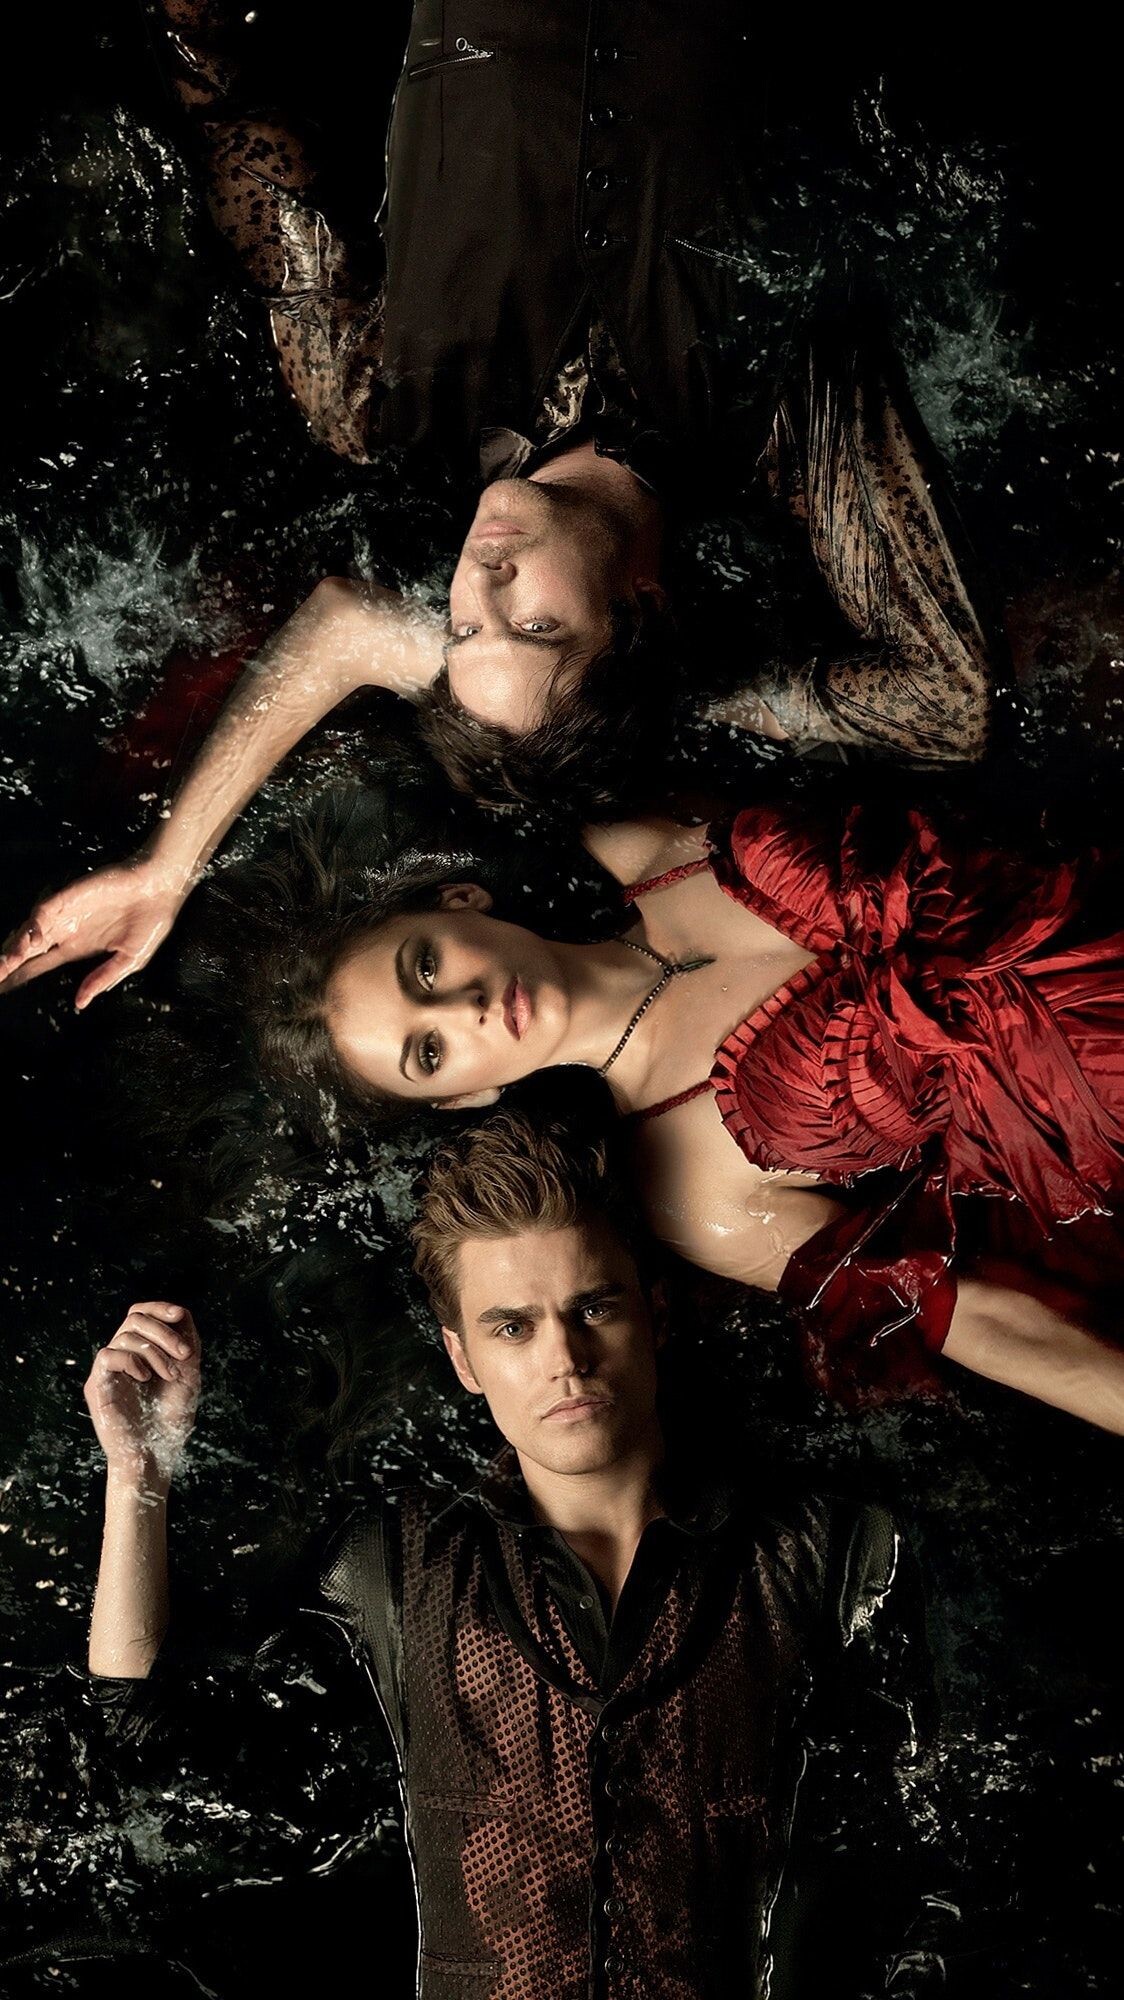 The Vampire Diaries (TV Series): Serial Movies, Known Related Shows Such As "The Originals", "The Originals: The Awakening", "Legacies", Outerbanks Intertainment, Alloy Entertainment. 1130x2000 HD Wallpaper.